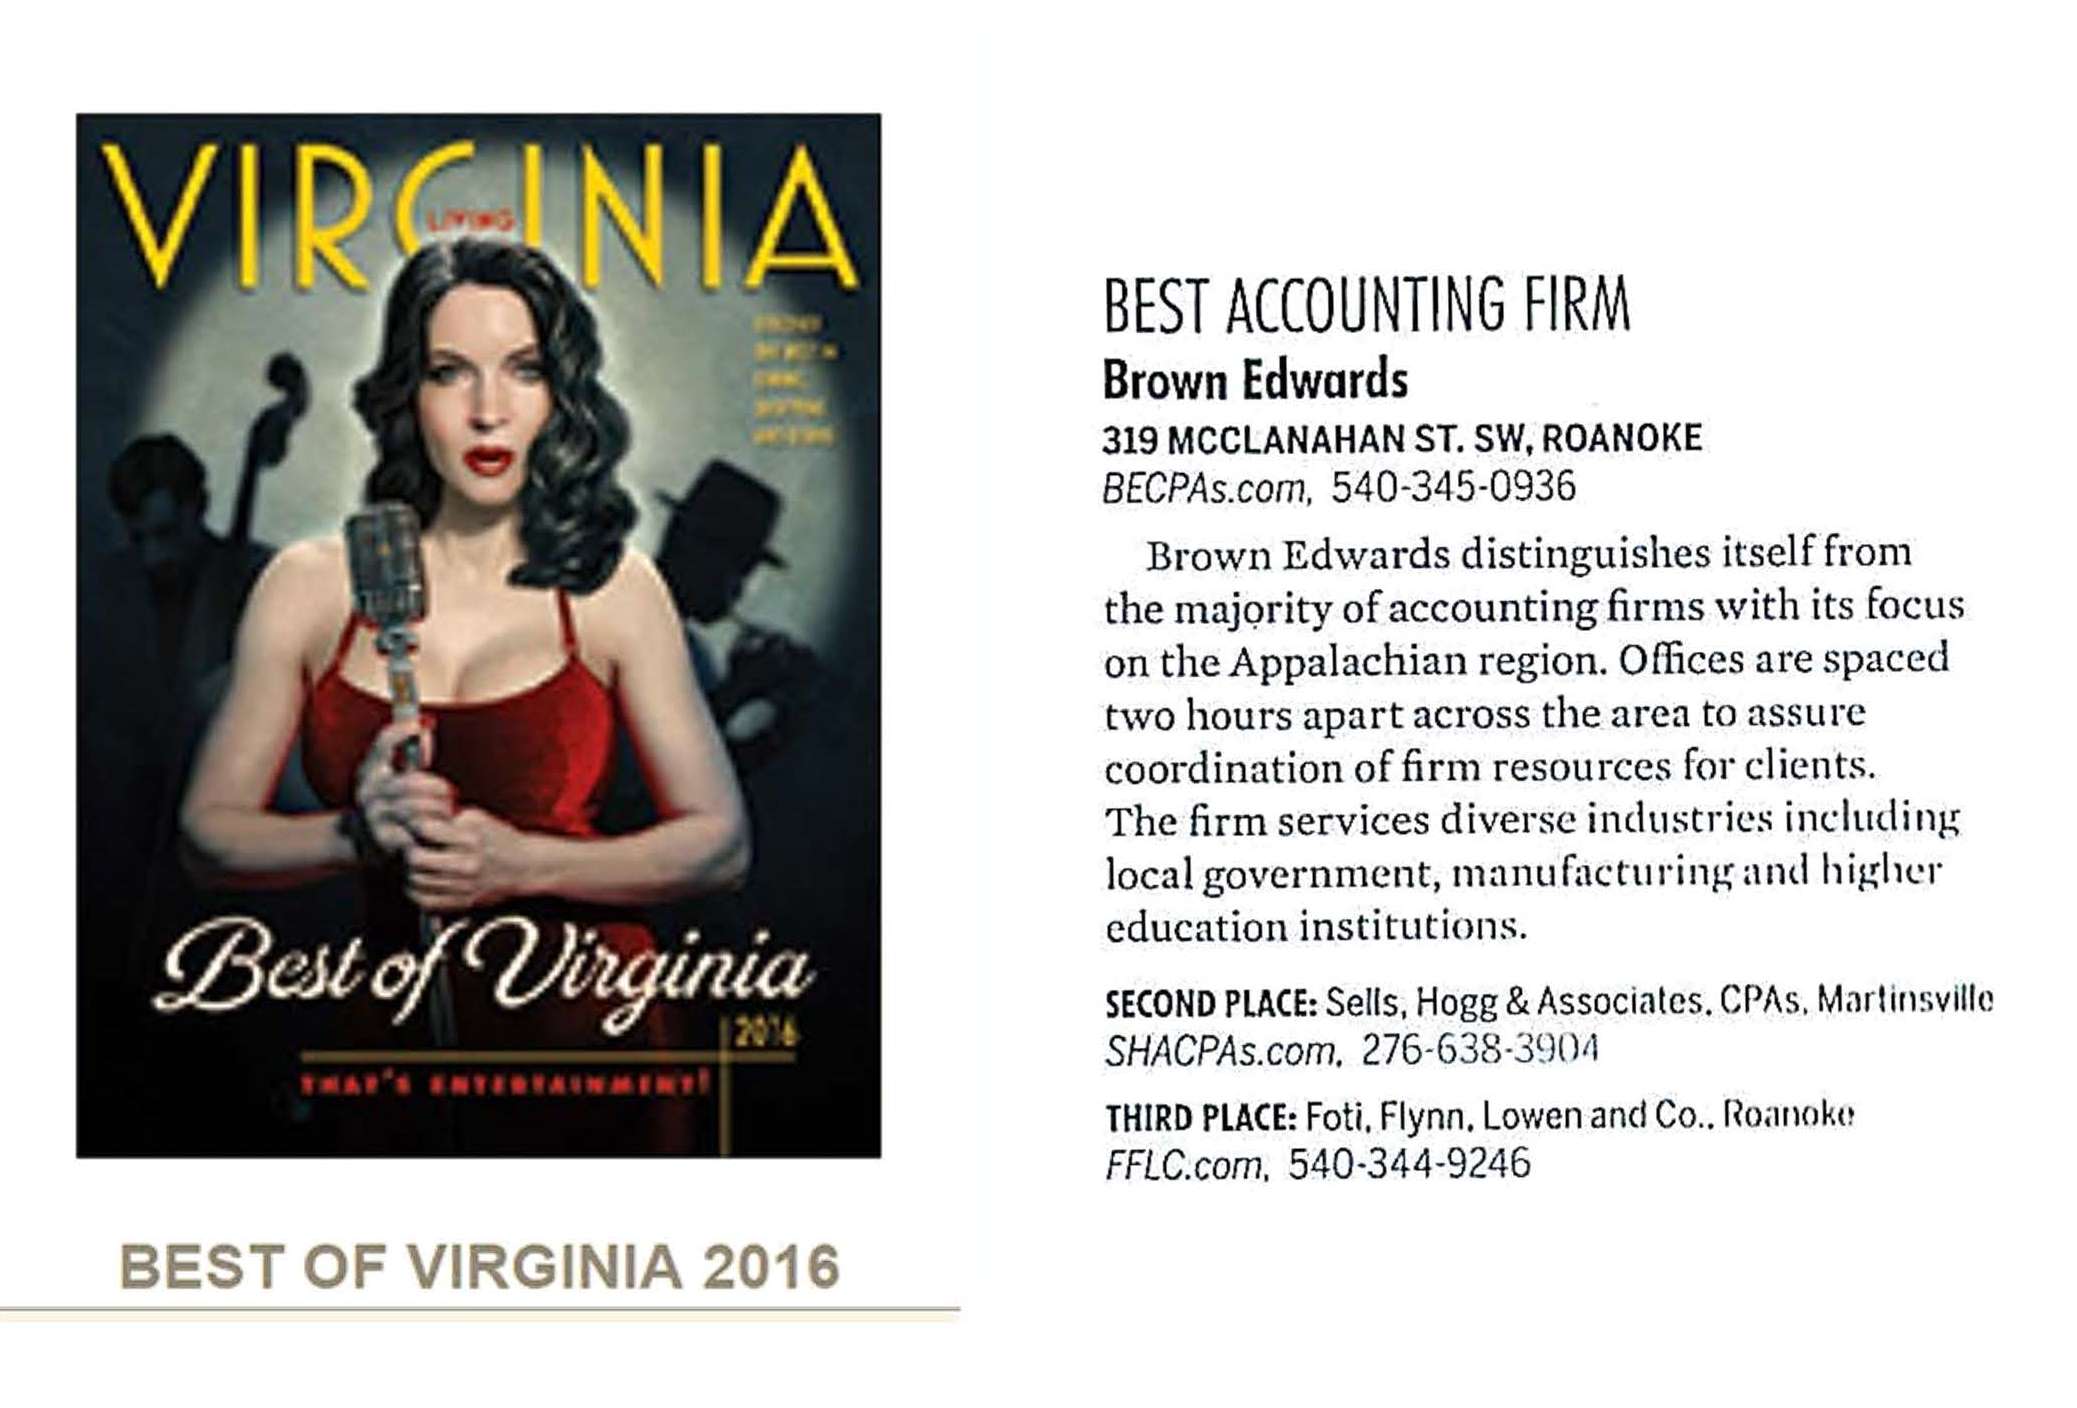 Brown Edwards has been voted as the BEST ACCOUNTING FIRM in Southwest Virginia in Virginia Living Magazine